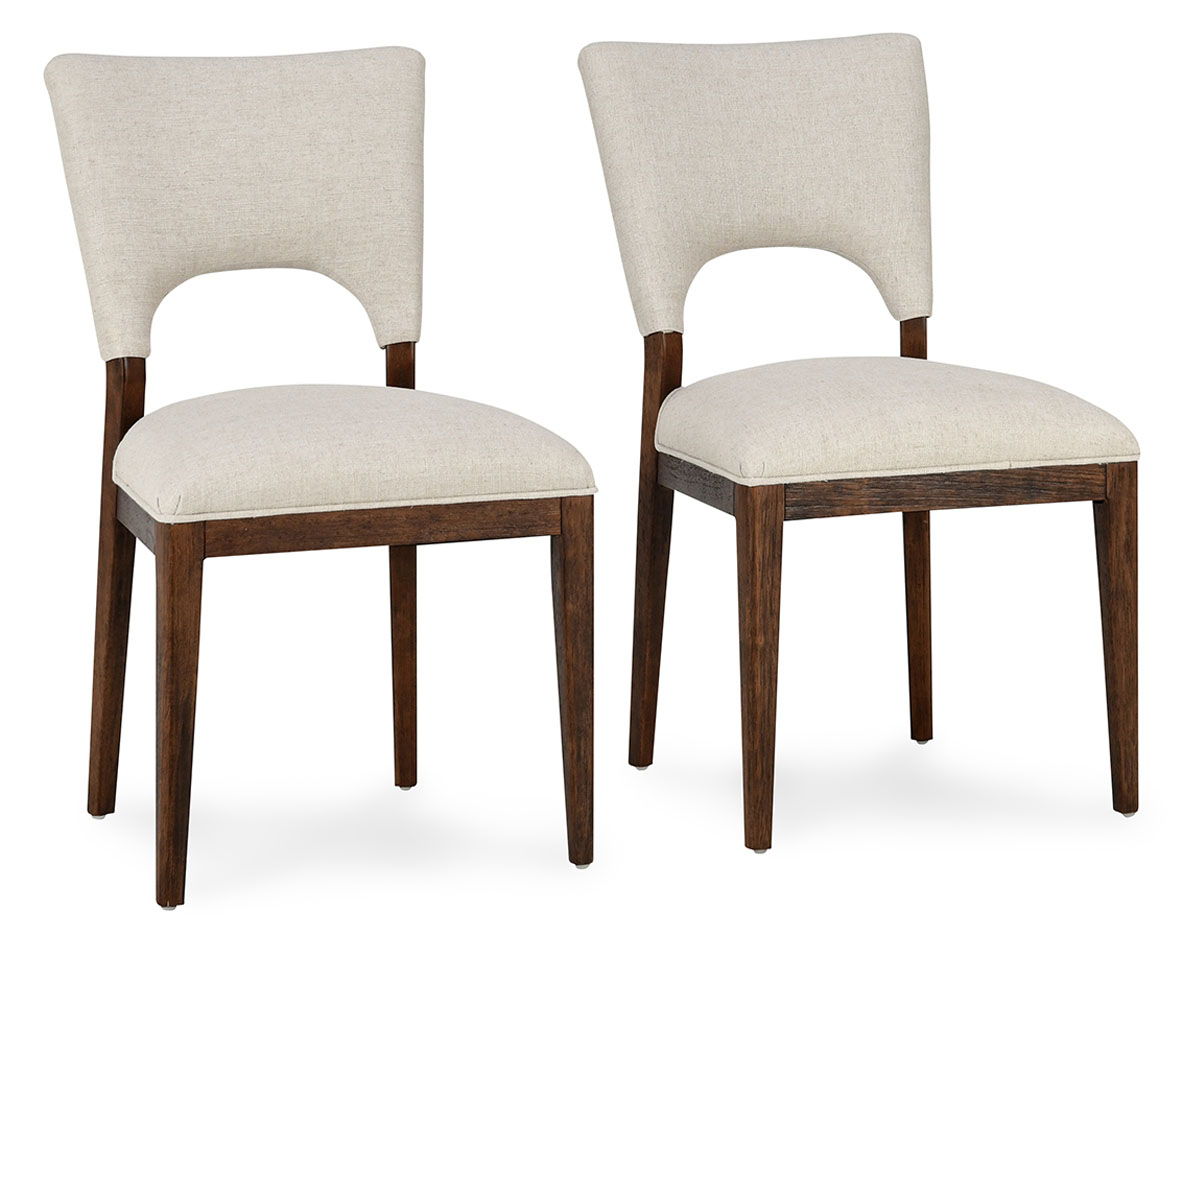 Mitchel - Upholstered Dining Chair (Set of 2)